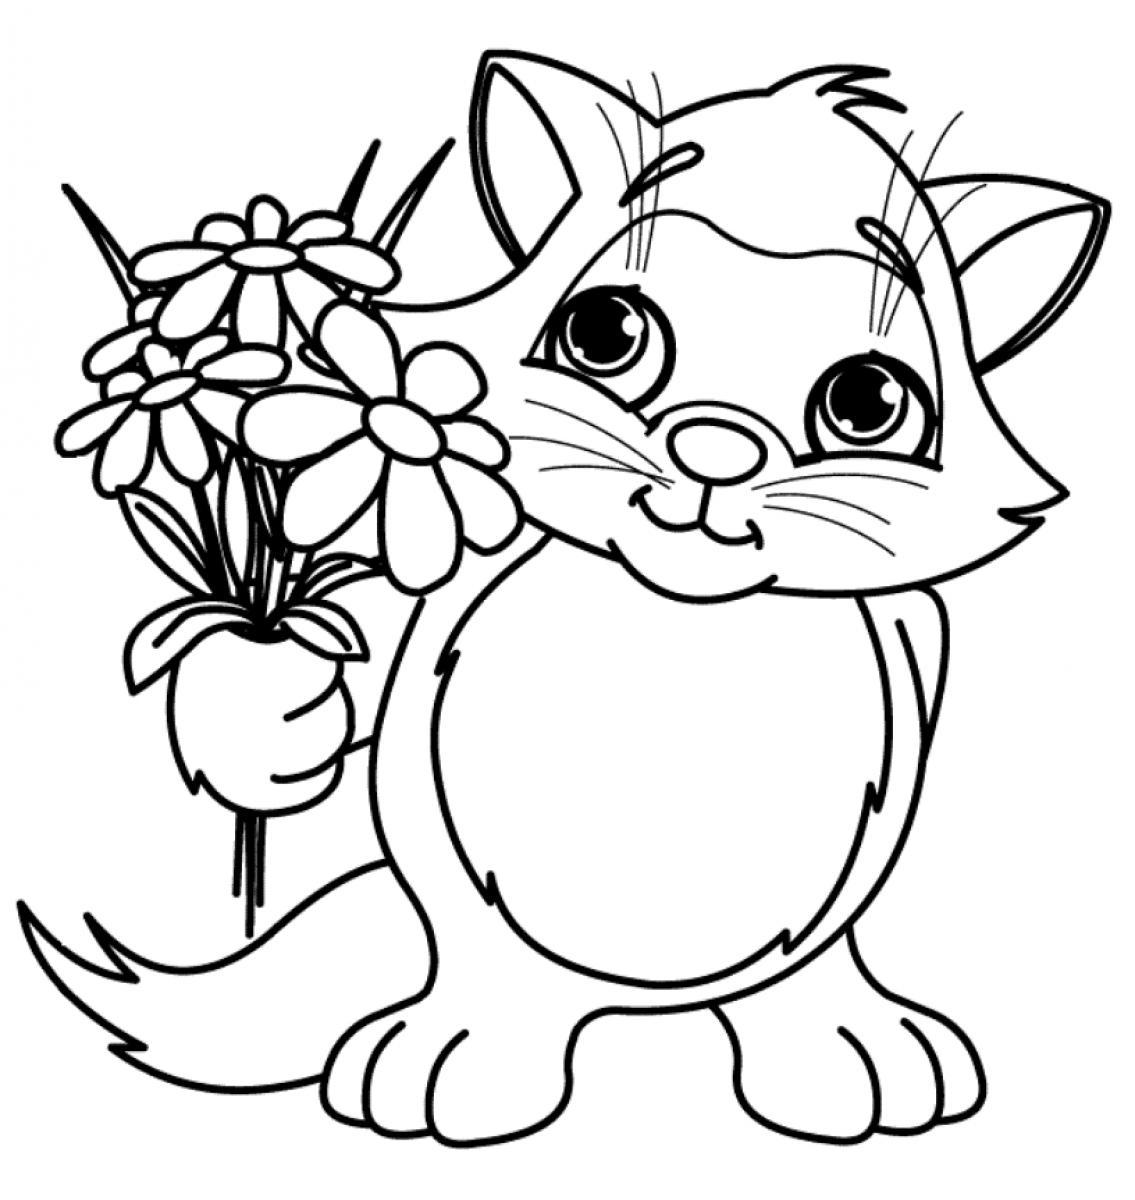 Flower Coloring Pages | Free download on ClipArtMag